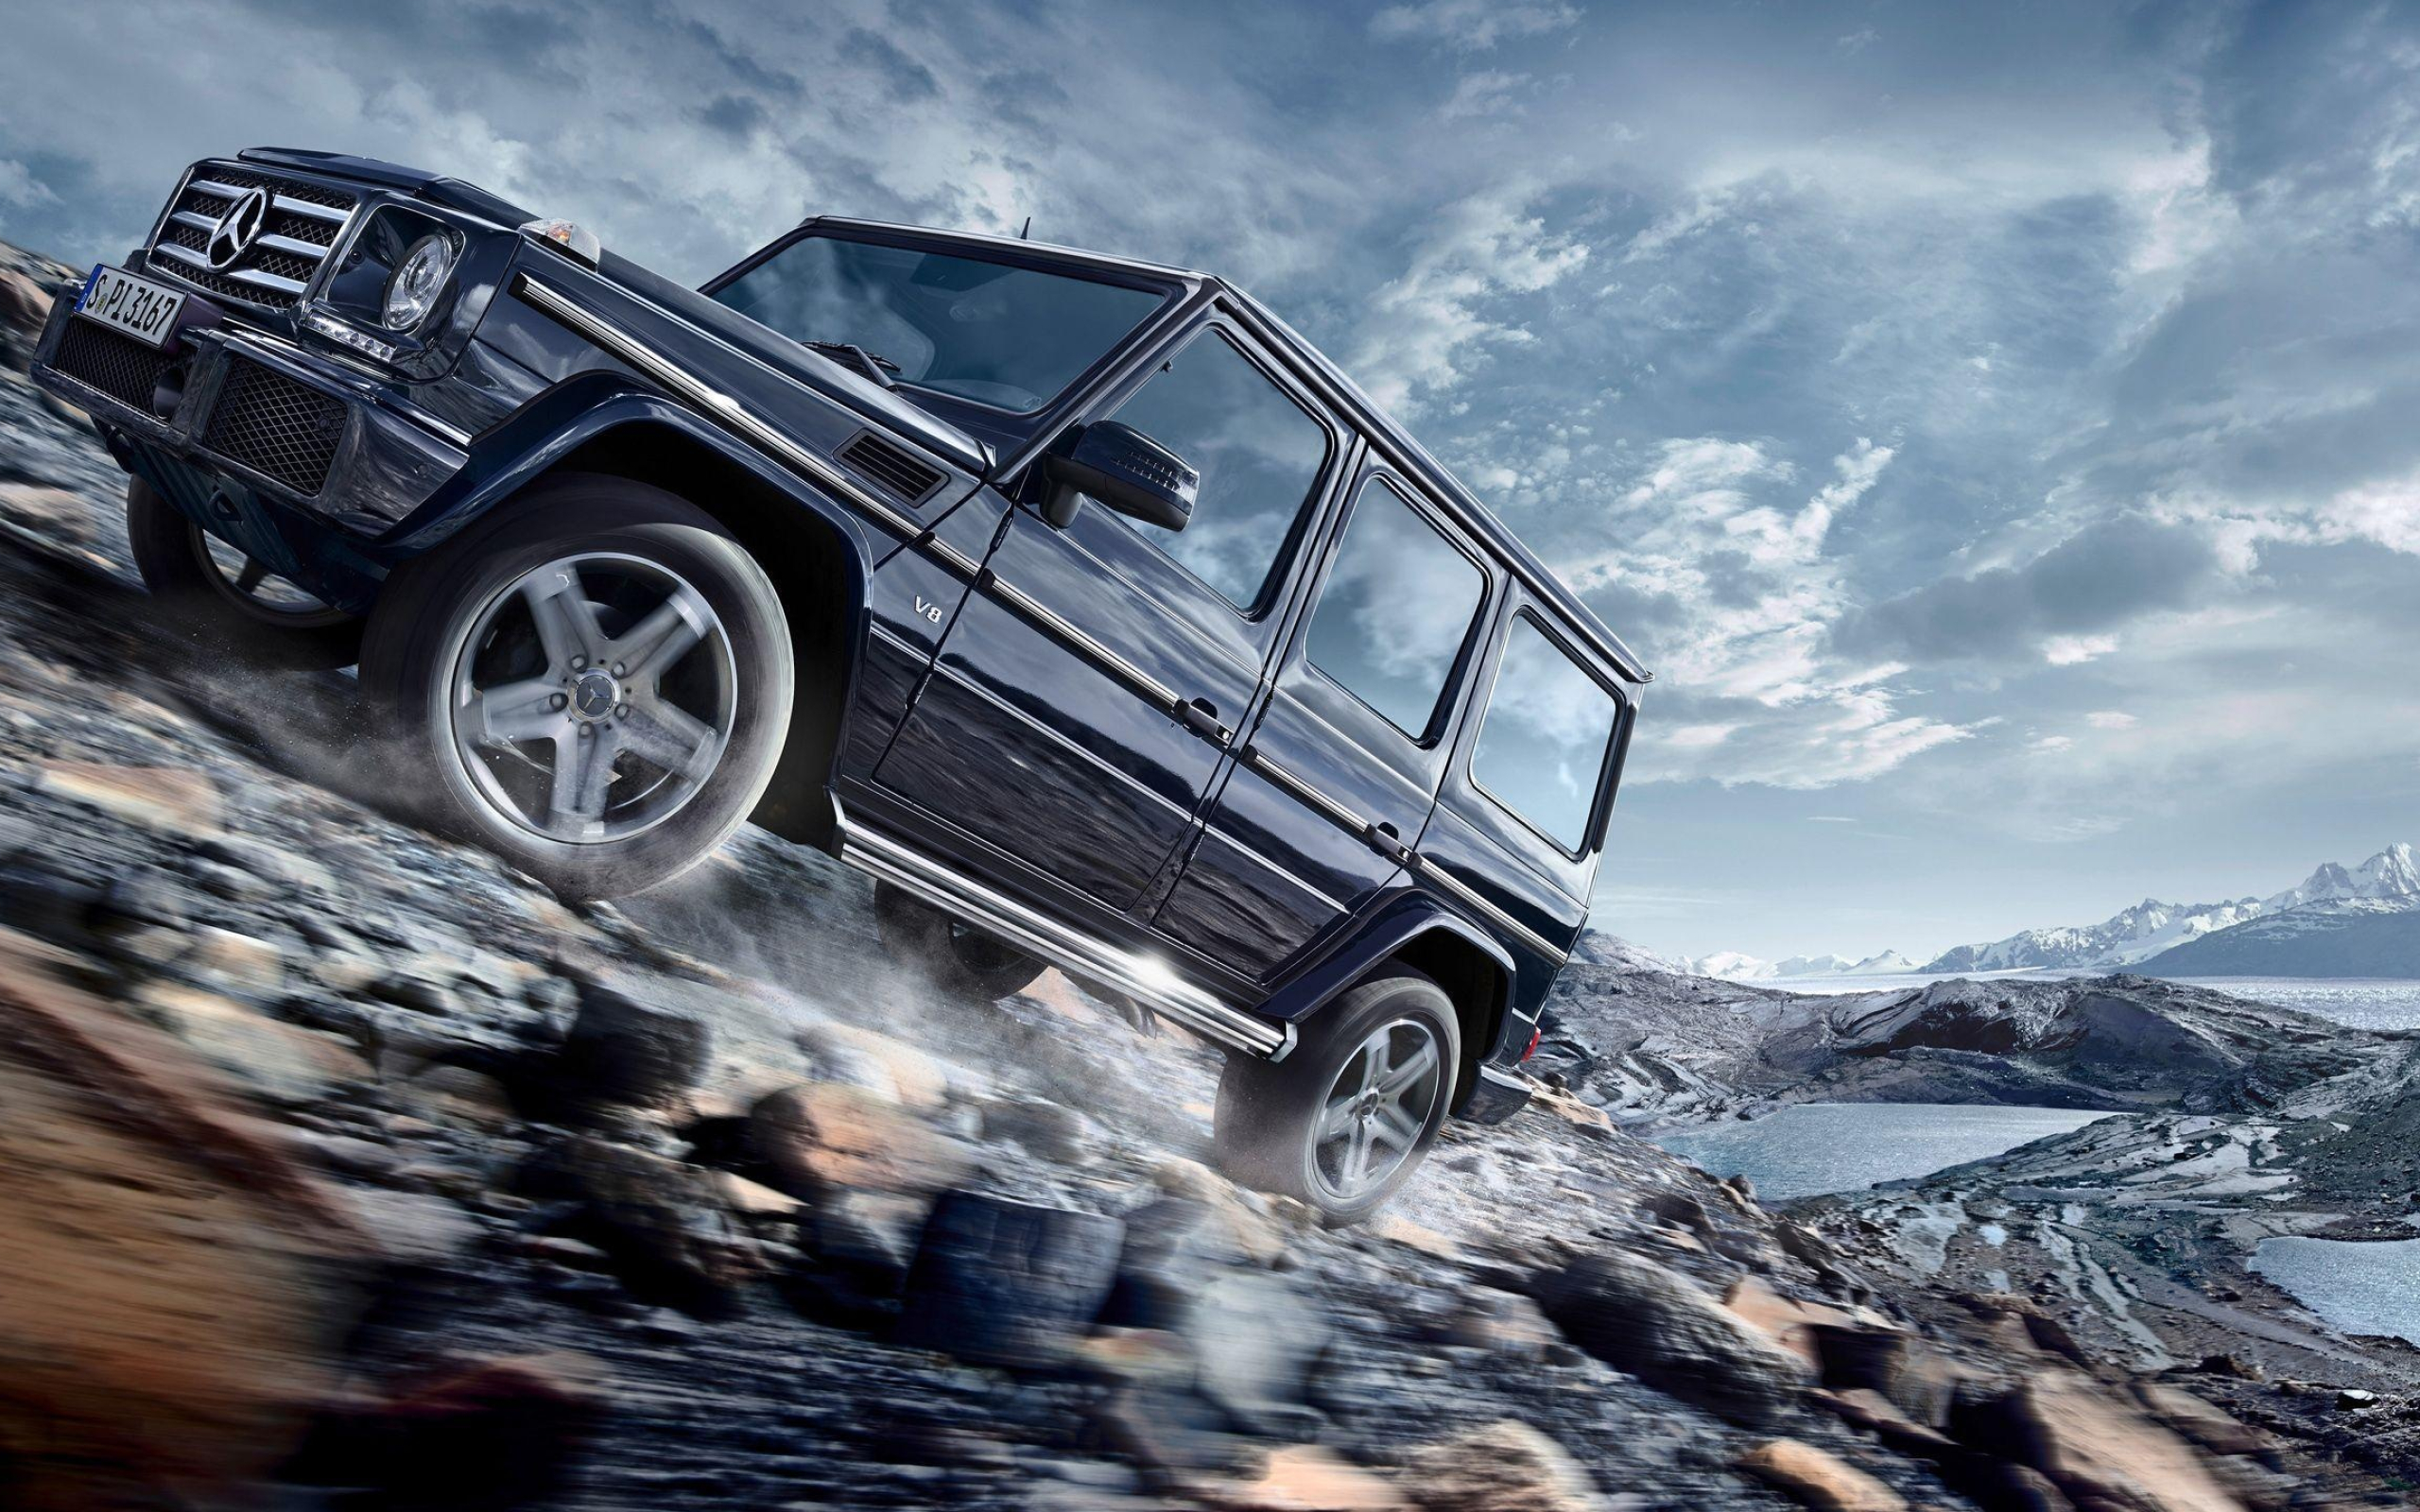 Off-road Driving: Mercedes G-Class, Off-road luxury cars, Cross Country Vehicle (CCV) trialing. 2560x1600 HD Wallpaper.